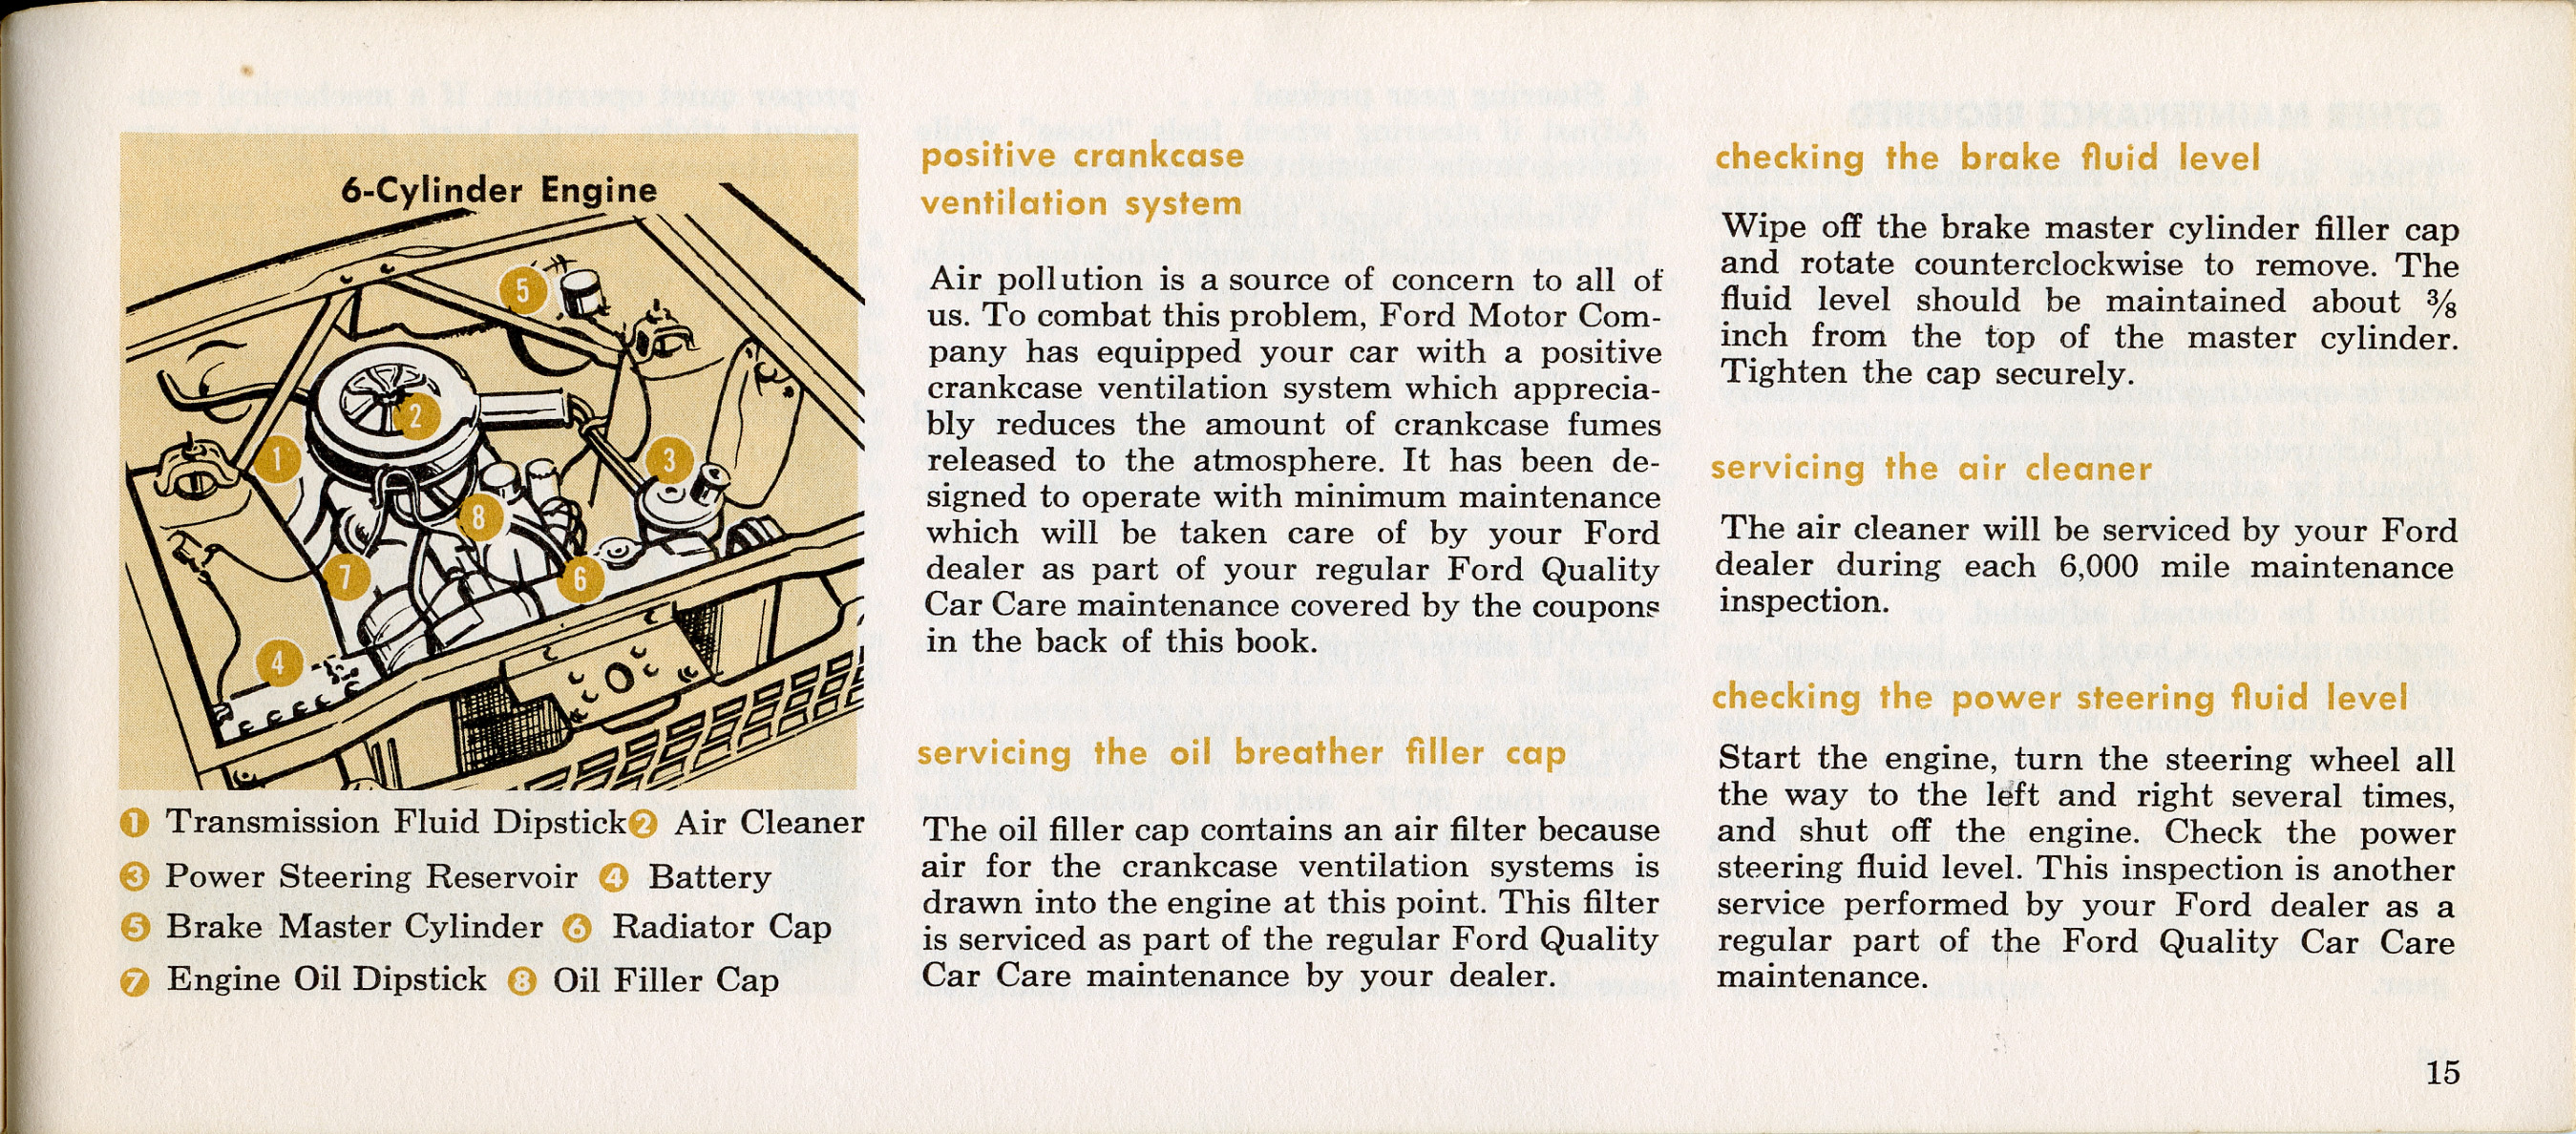 1964_Ford_Falcon_Owners_Manual-15